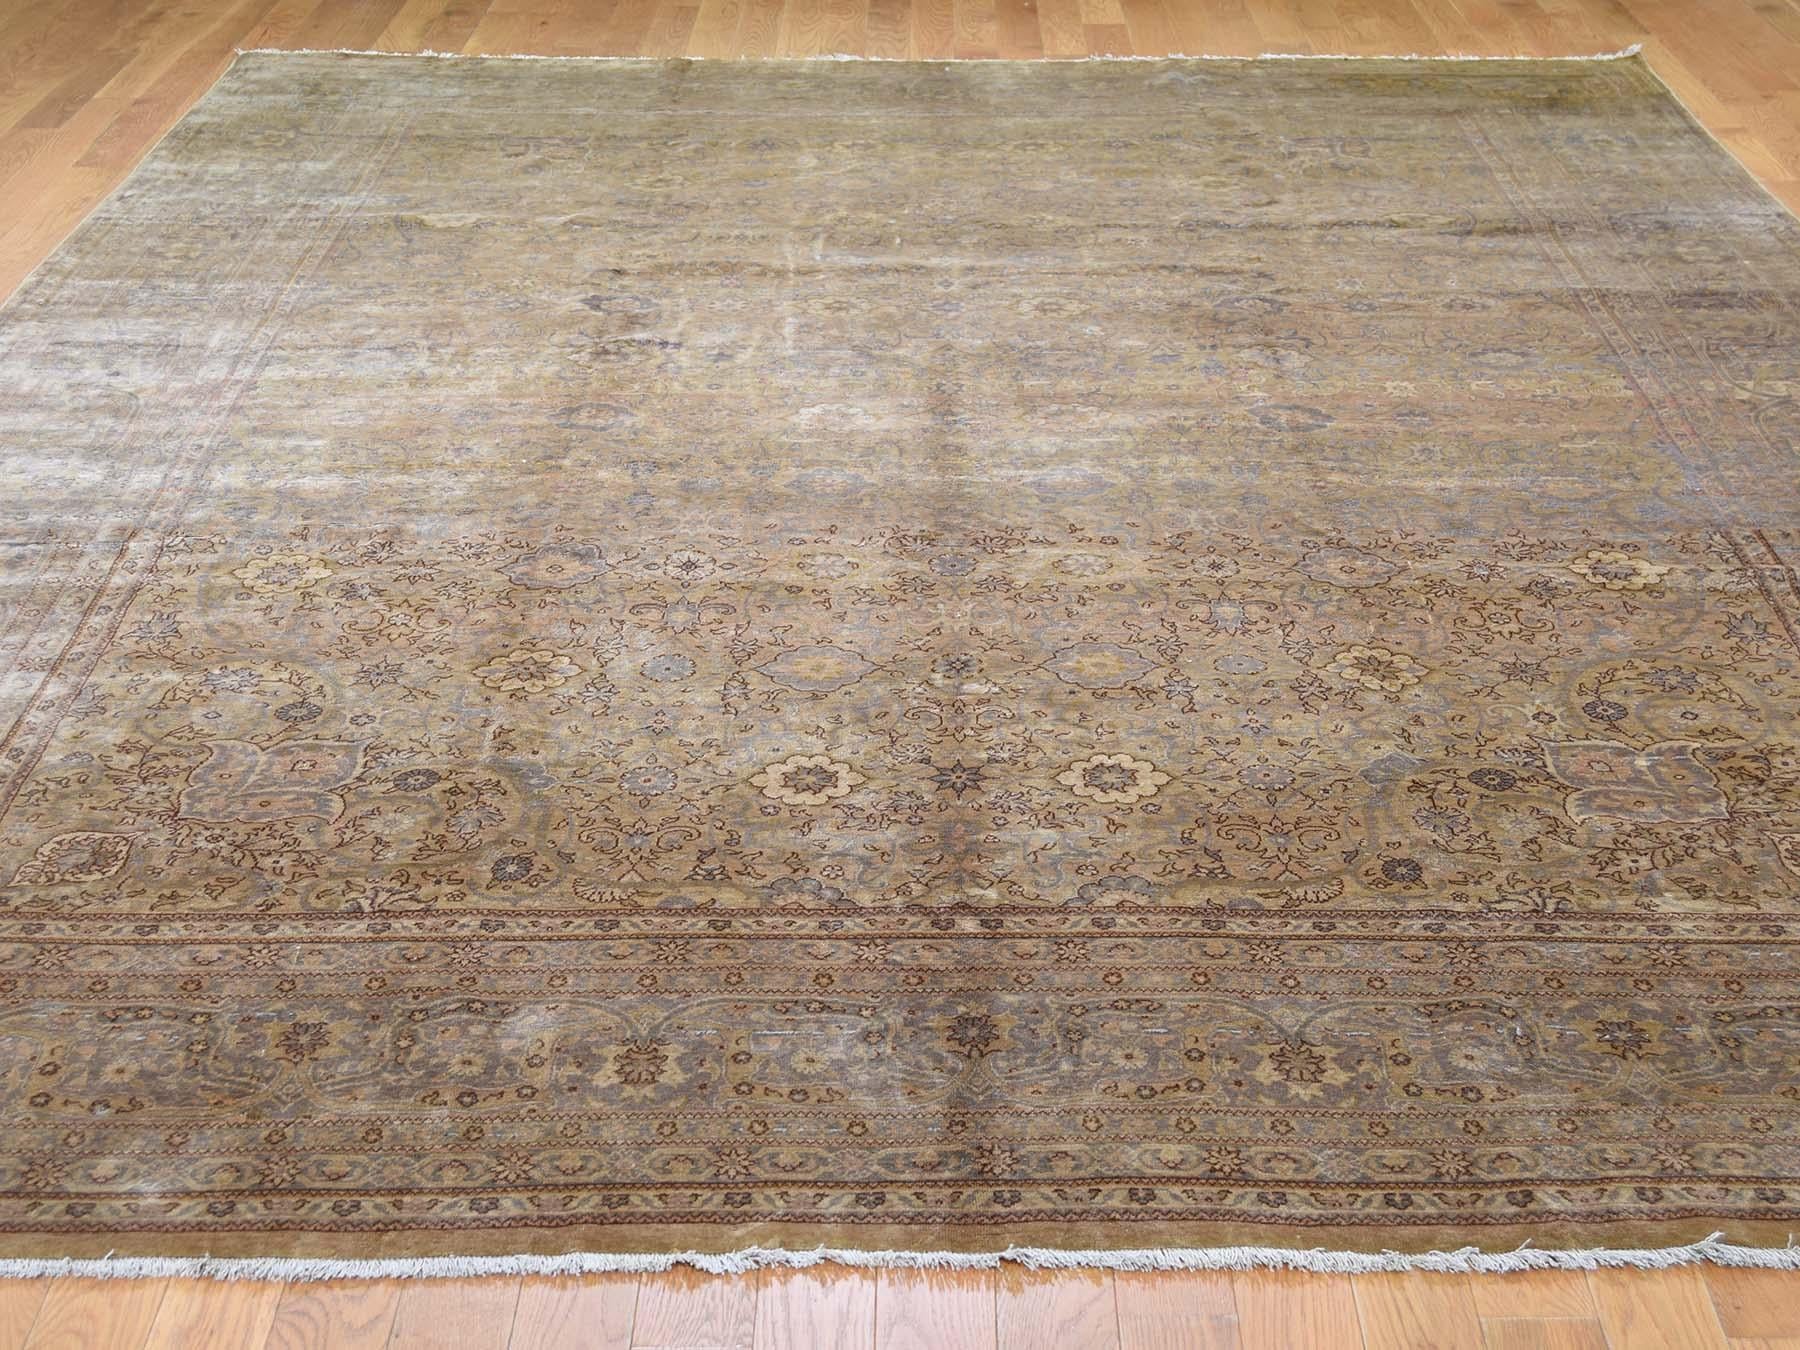 This is a genuine hand knotted oriental rug. It is not Hhand tufted or machine made rug. Our entire inventory is made of either hand knotted or handwoven rugs.

Adorn your house style with this splendid hand knotted Grey Turkish, is an original Pure